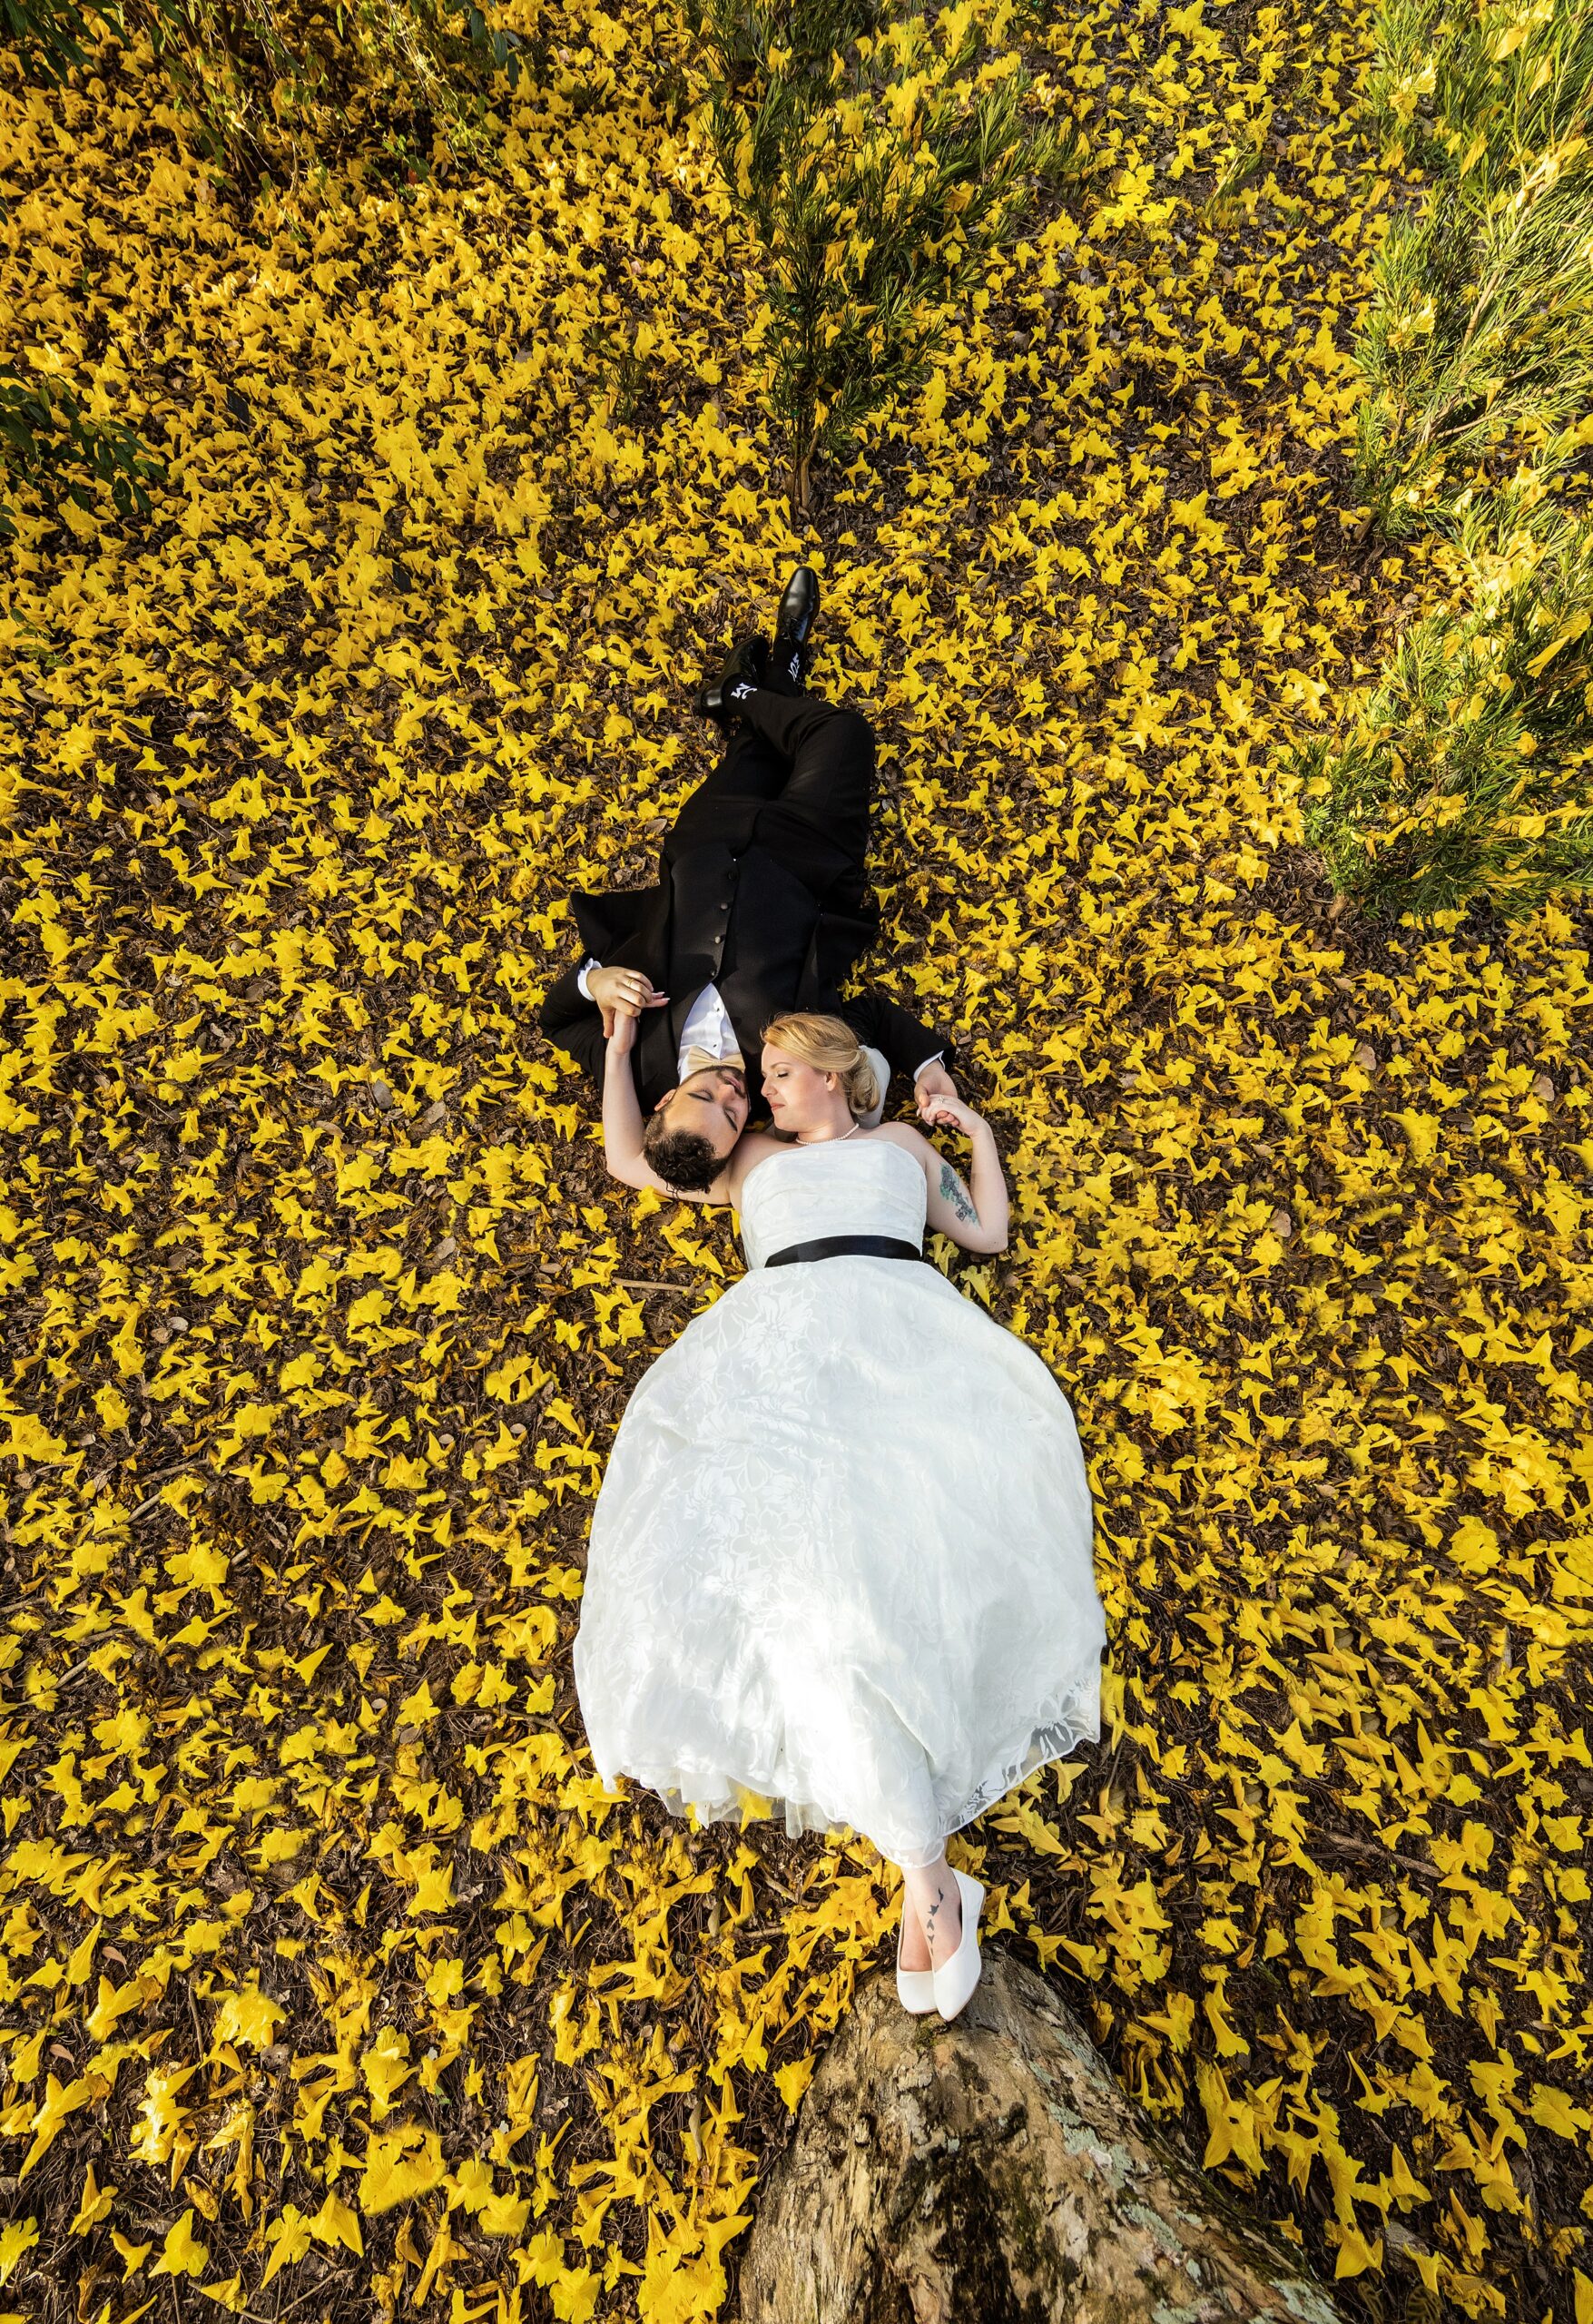 Newlyweds lay head to head in a bed of yellow leaves under a tree at their leu gardens wedding